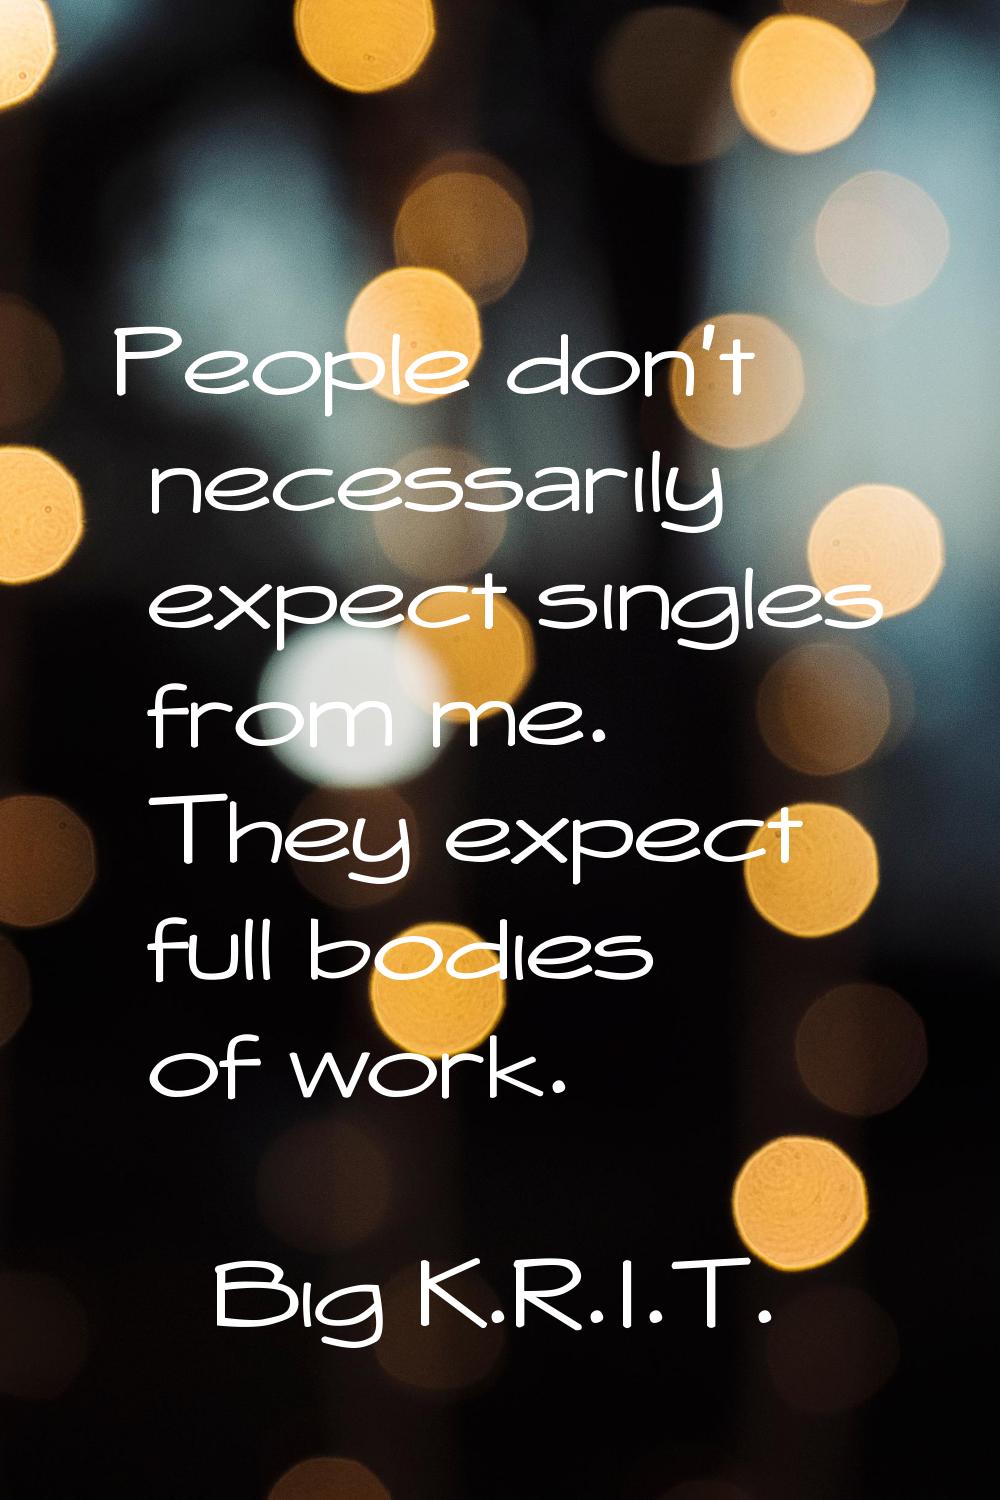 People don't necessarily expect singles from me. They expect full bodies of work.